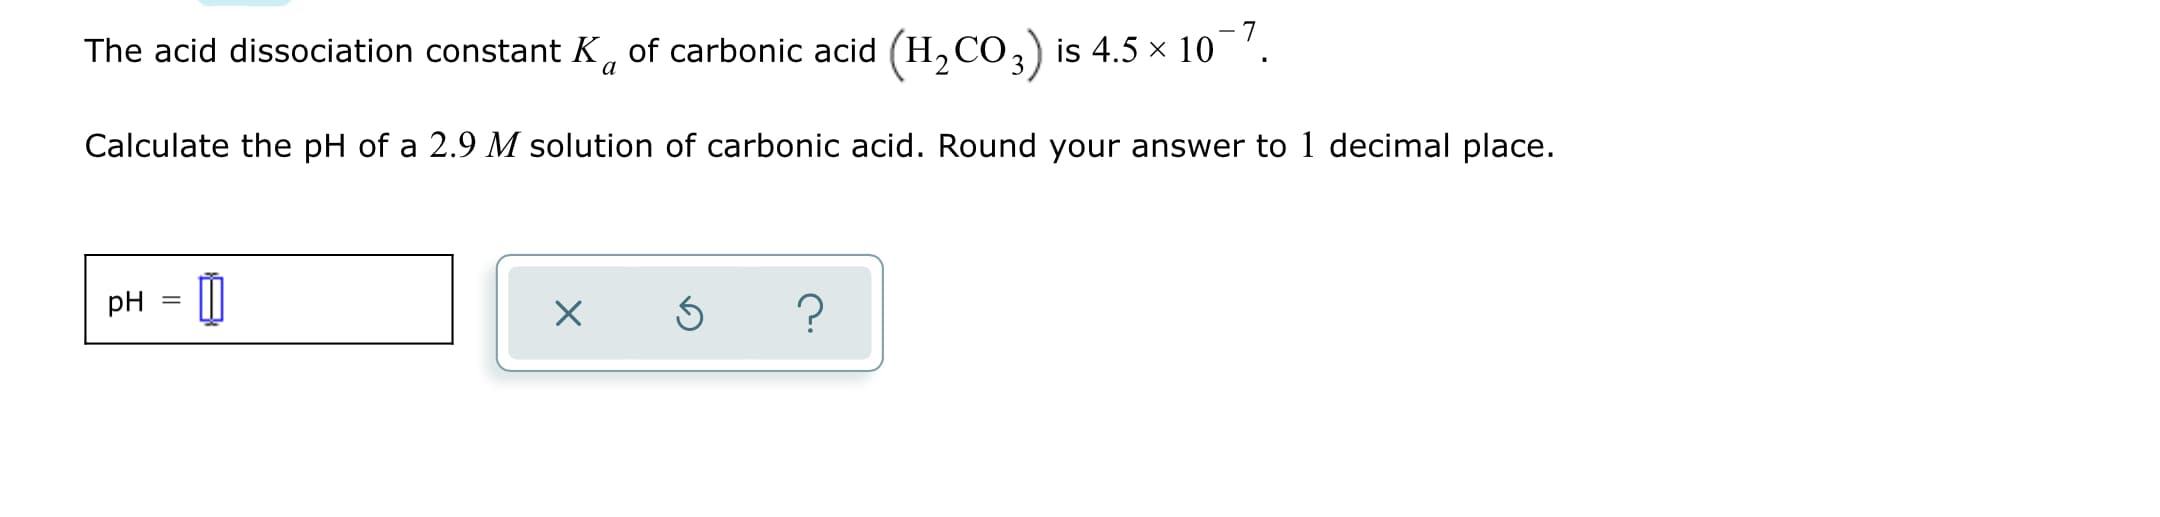 The acid dissociation constant K, of carbonic acid (H,CO,) is 4.5 × 10'.
Calculate the pH of a 2.9 M solution of carbonic acid. Round your answer to 1 decimal place.
pH
